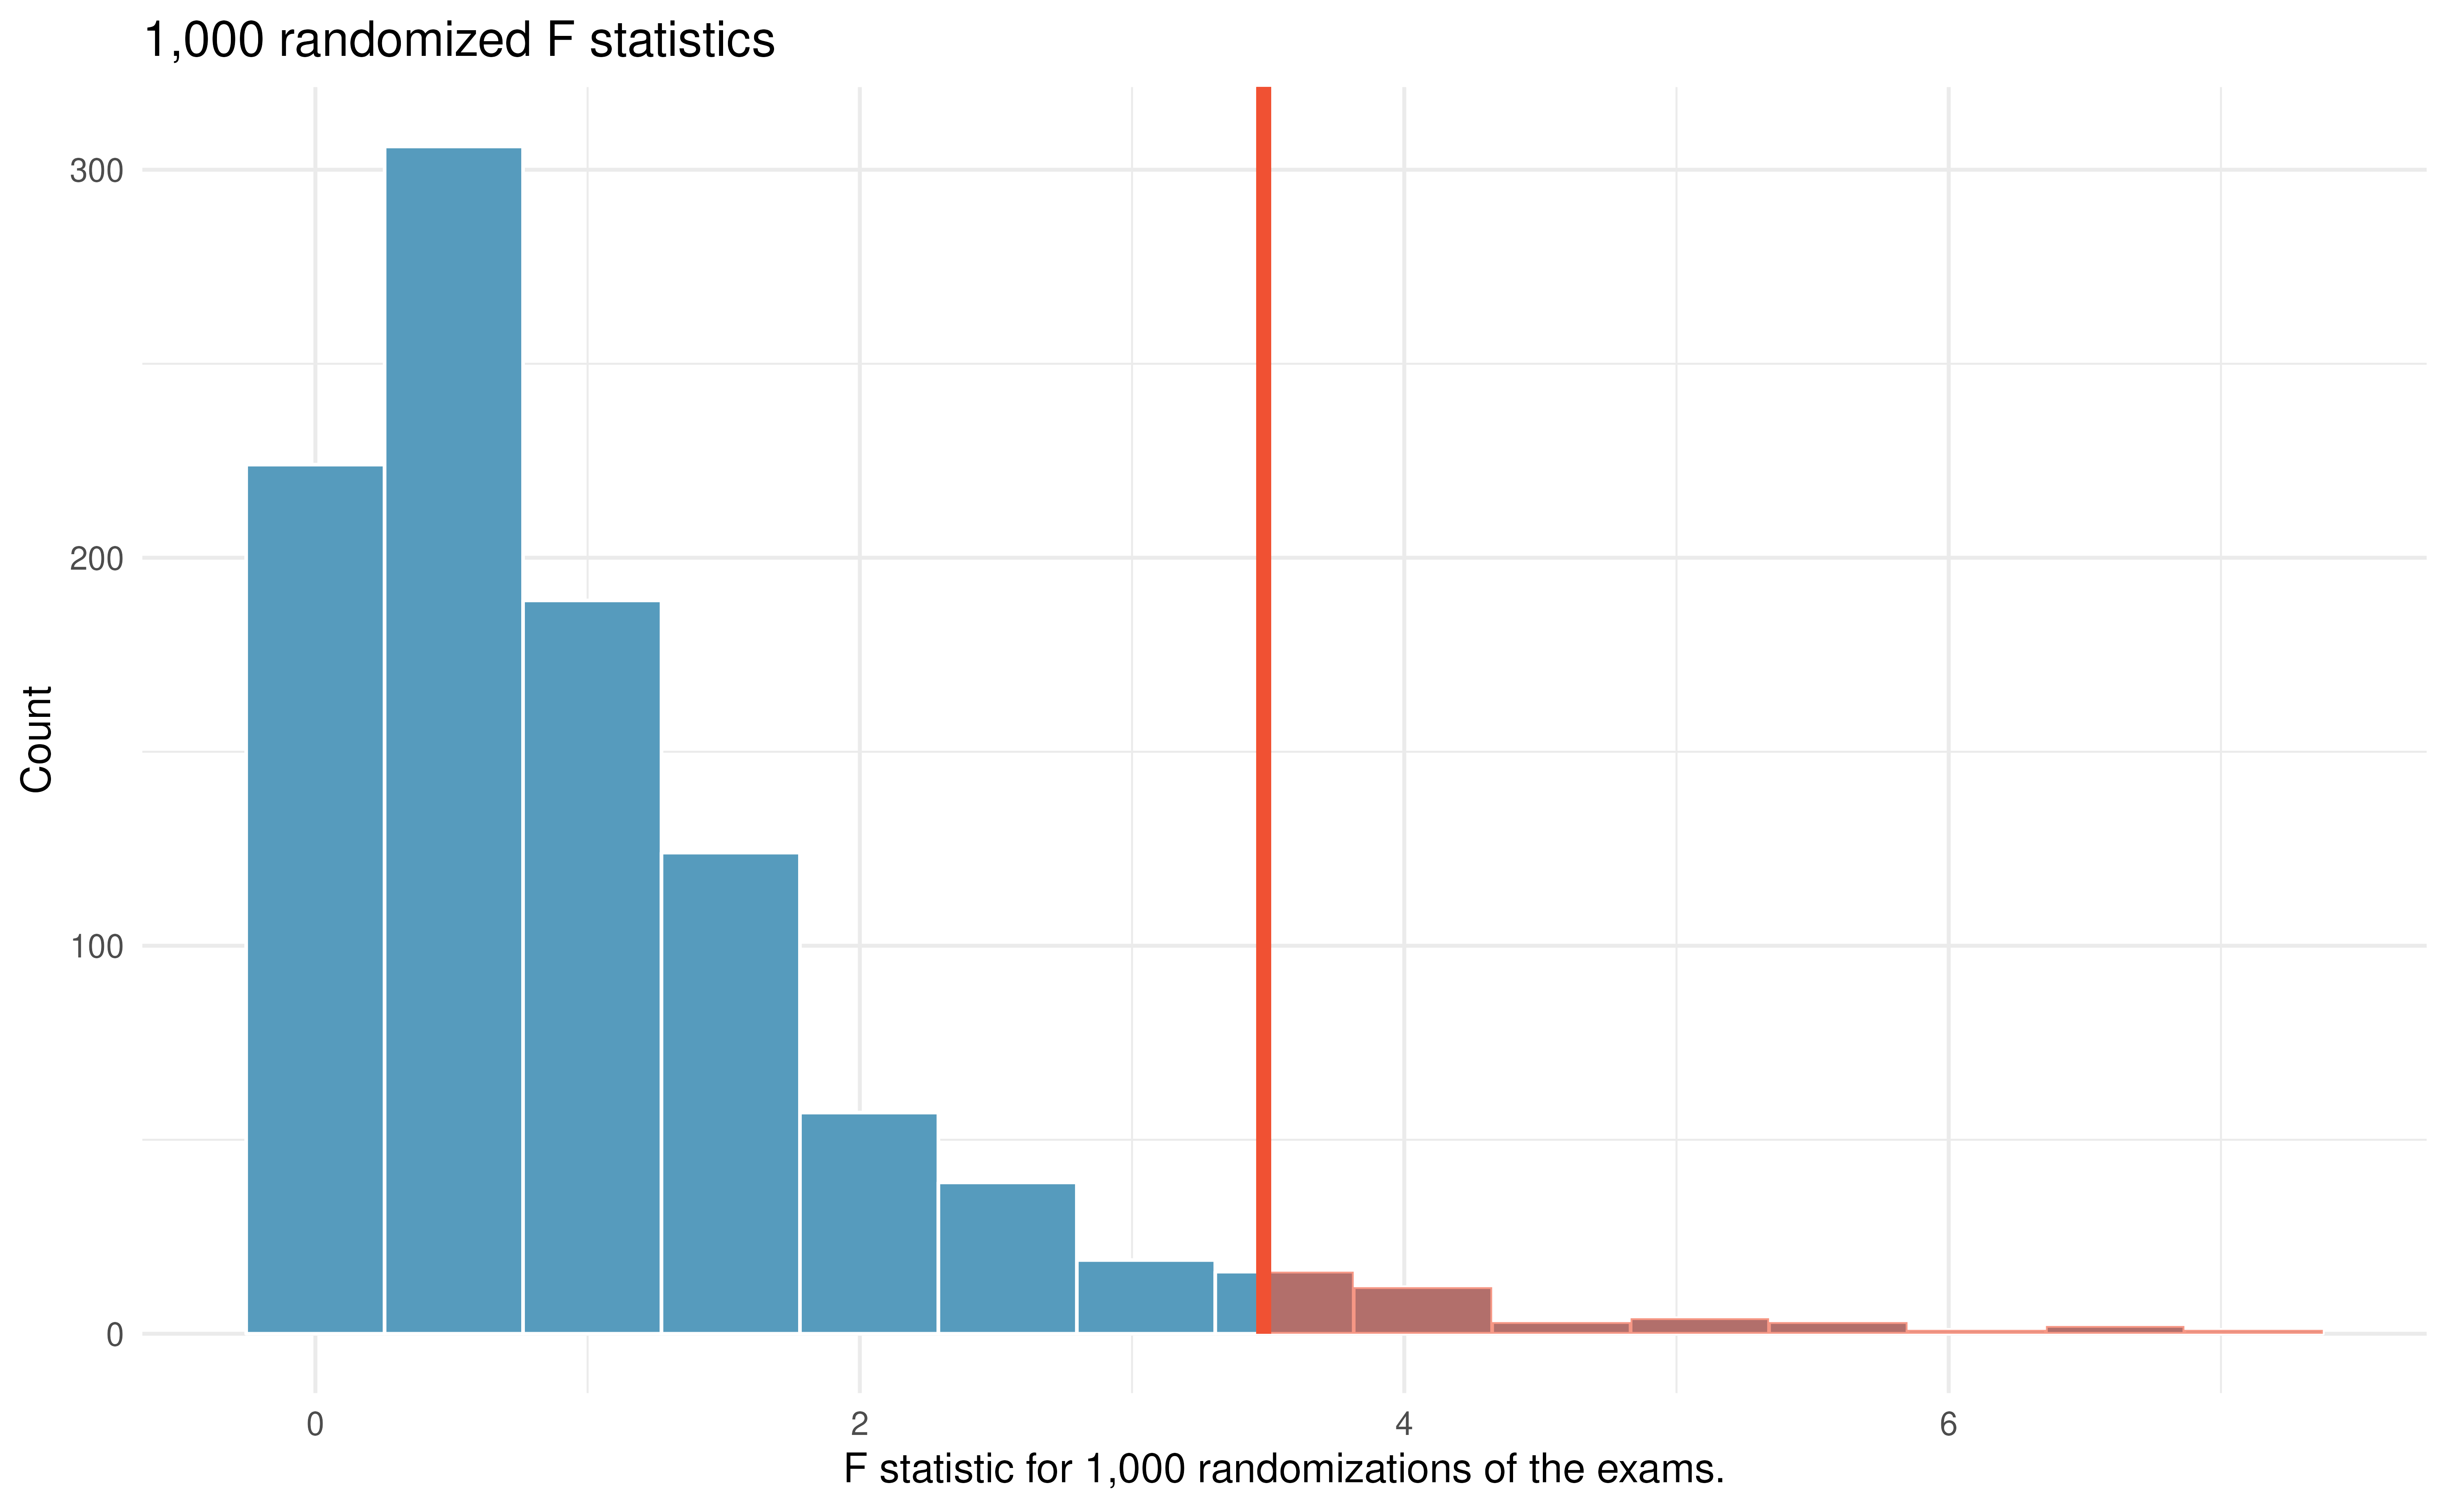 Histogram of F statistics calculated from 1000 different randomizations of the exam type. The observed F statistic is given as a red vertical line 3.48.  The area to the right is more extreme than the observed value and represents the p-value.